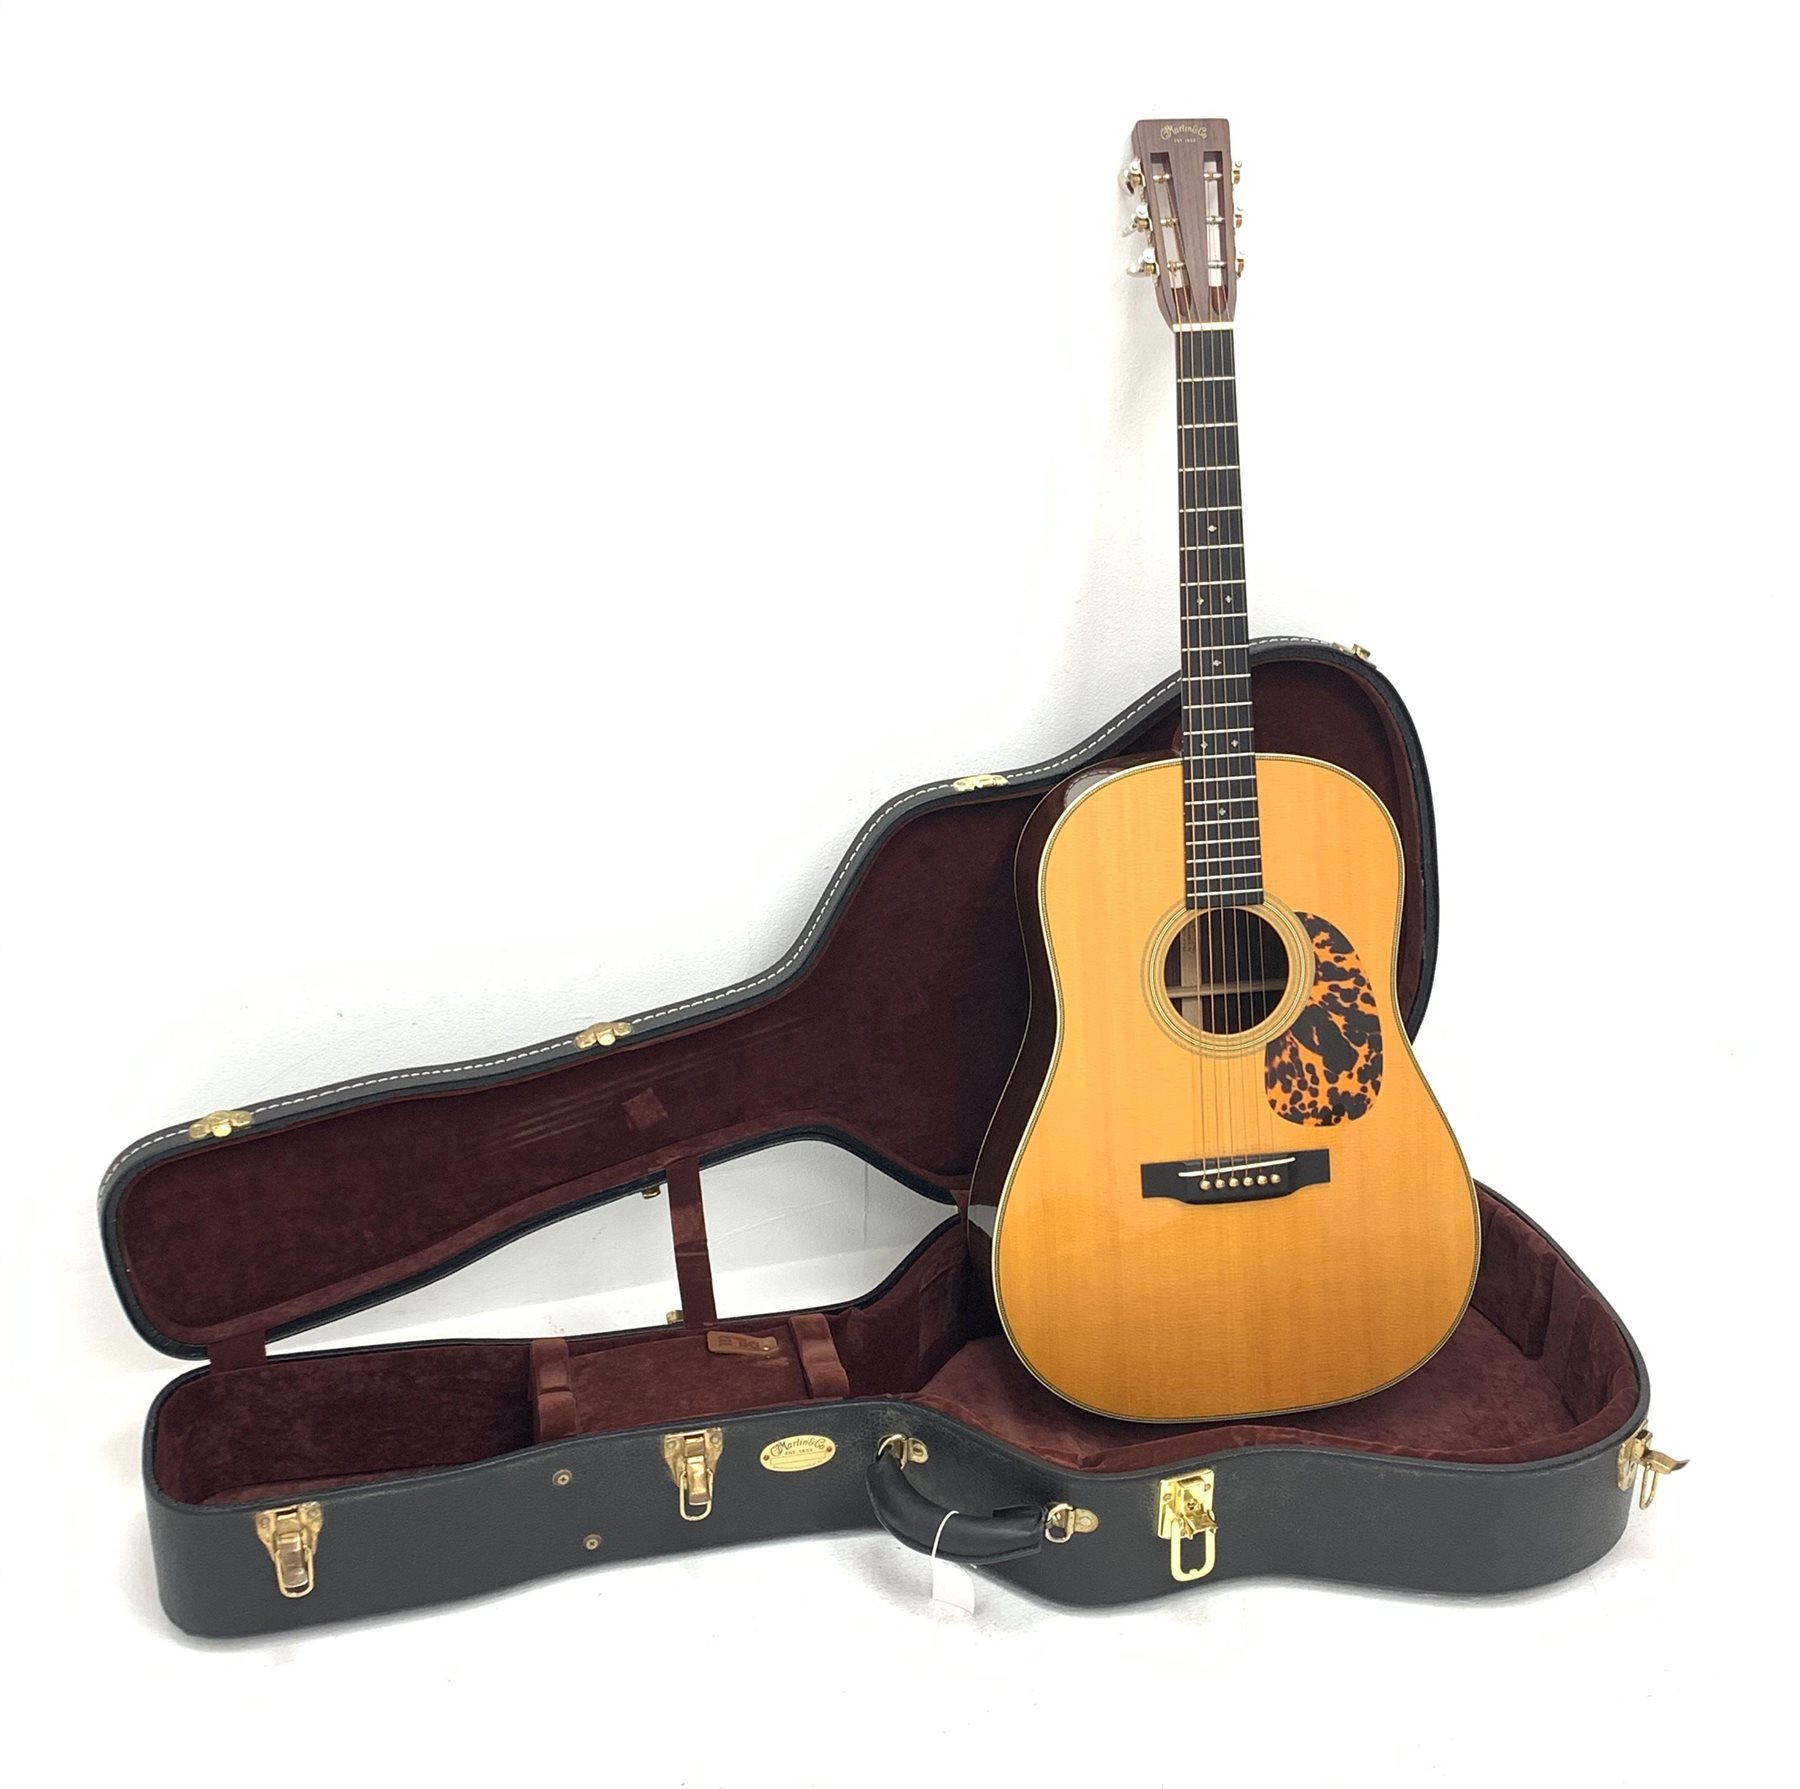 C.F. Martin & Co HD-28VS acoustic guitar, made in USA, gloss finish, in Martin & Co. carrying case